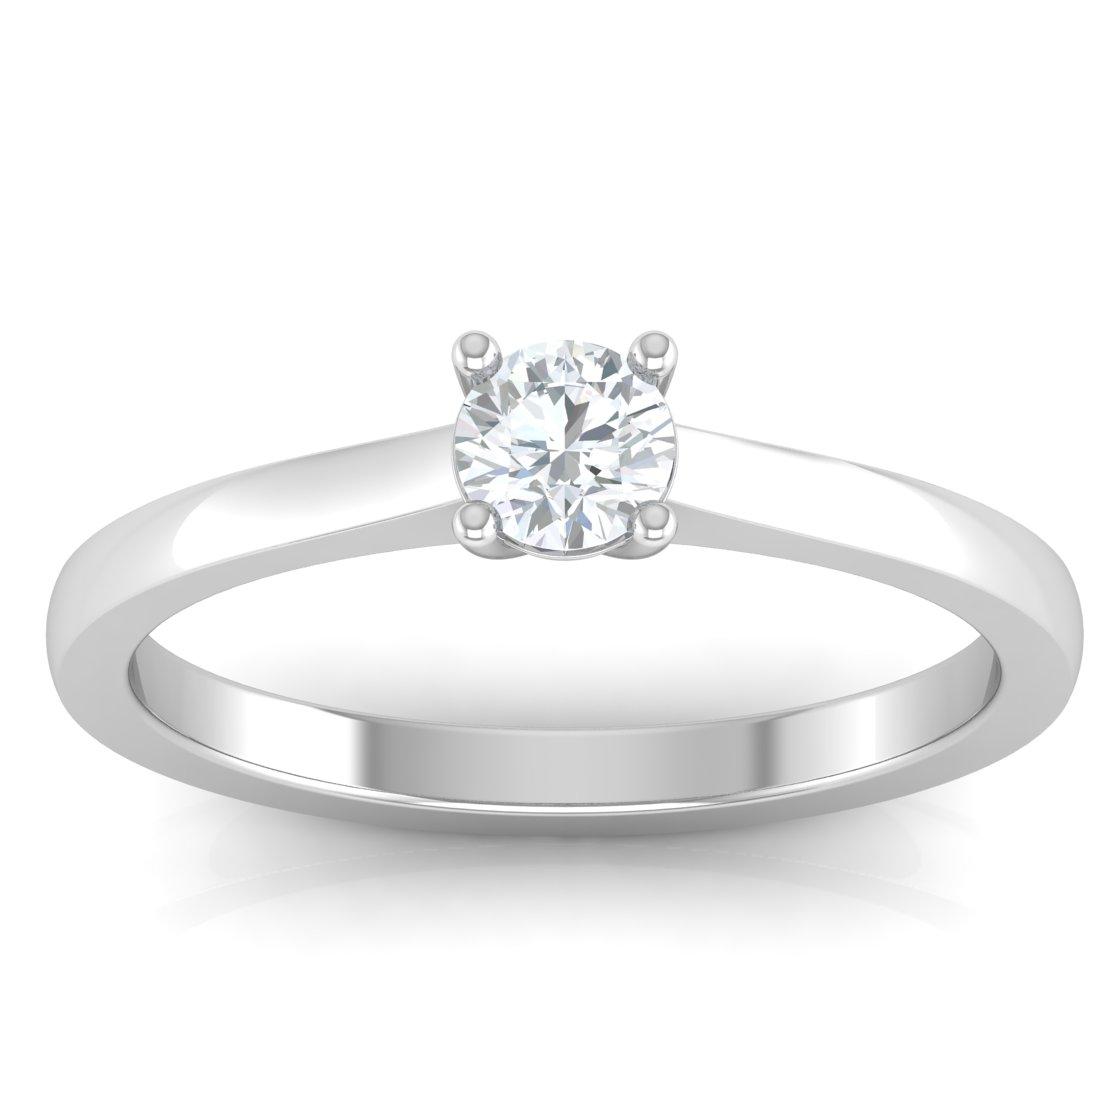 Engagement Rings Made of White Gold | White gold solitaire engagement ring